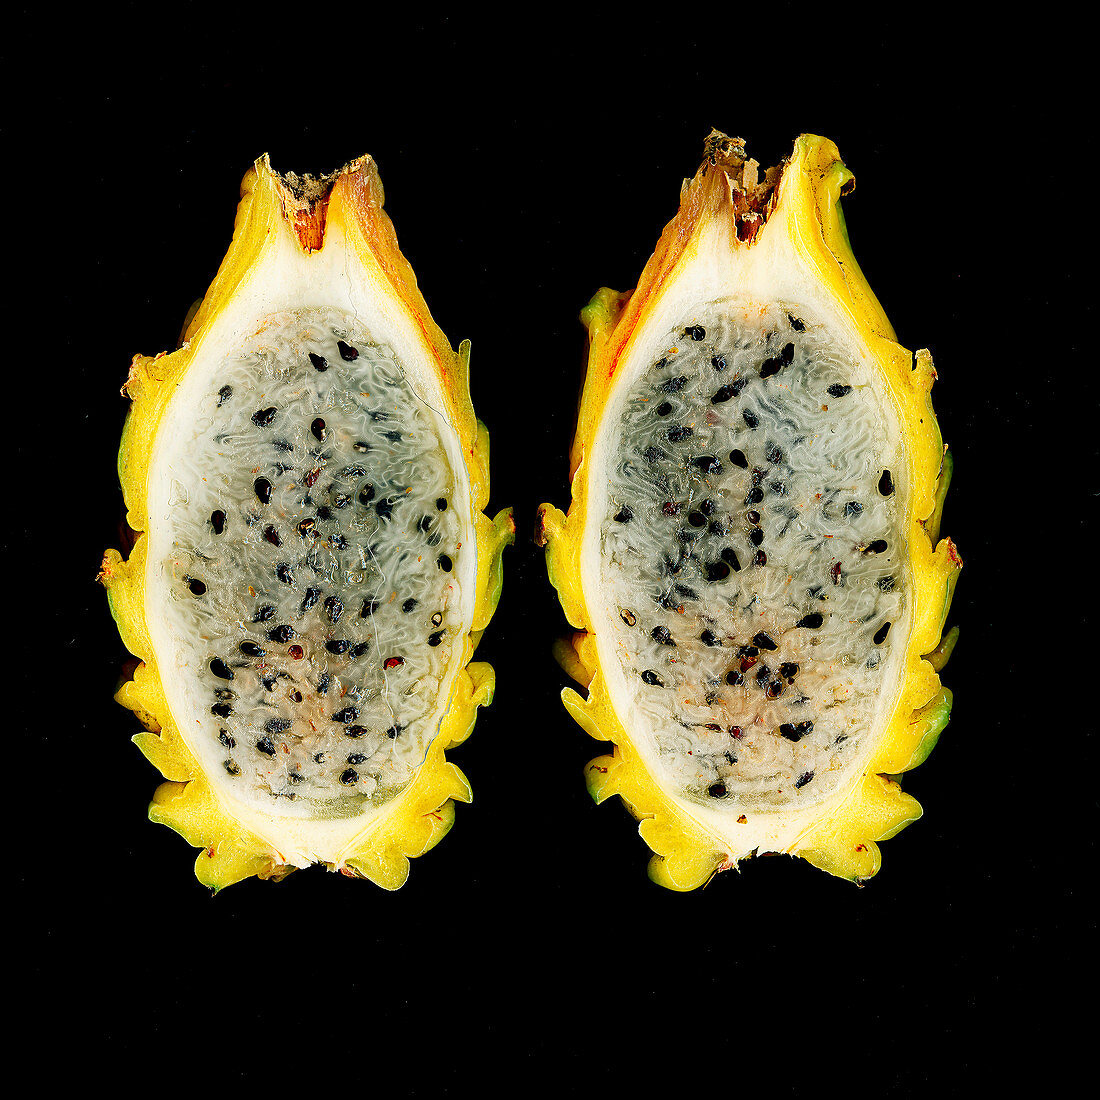 A sliced yellow pitahaya against a black background